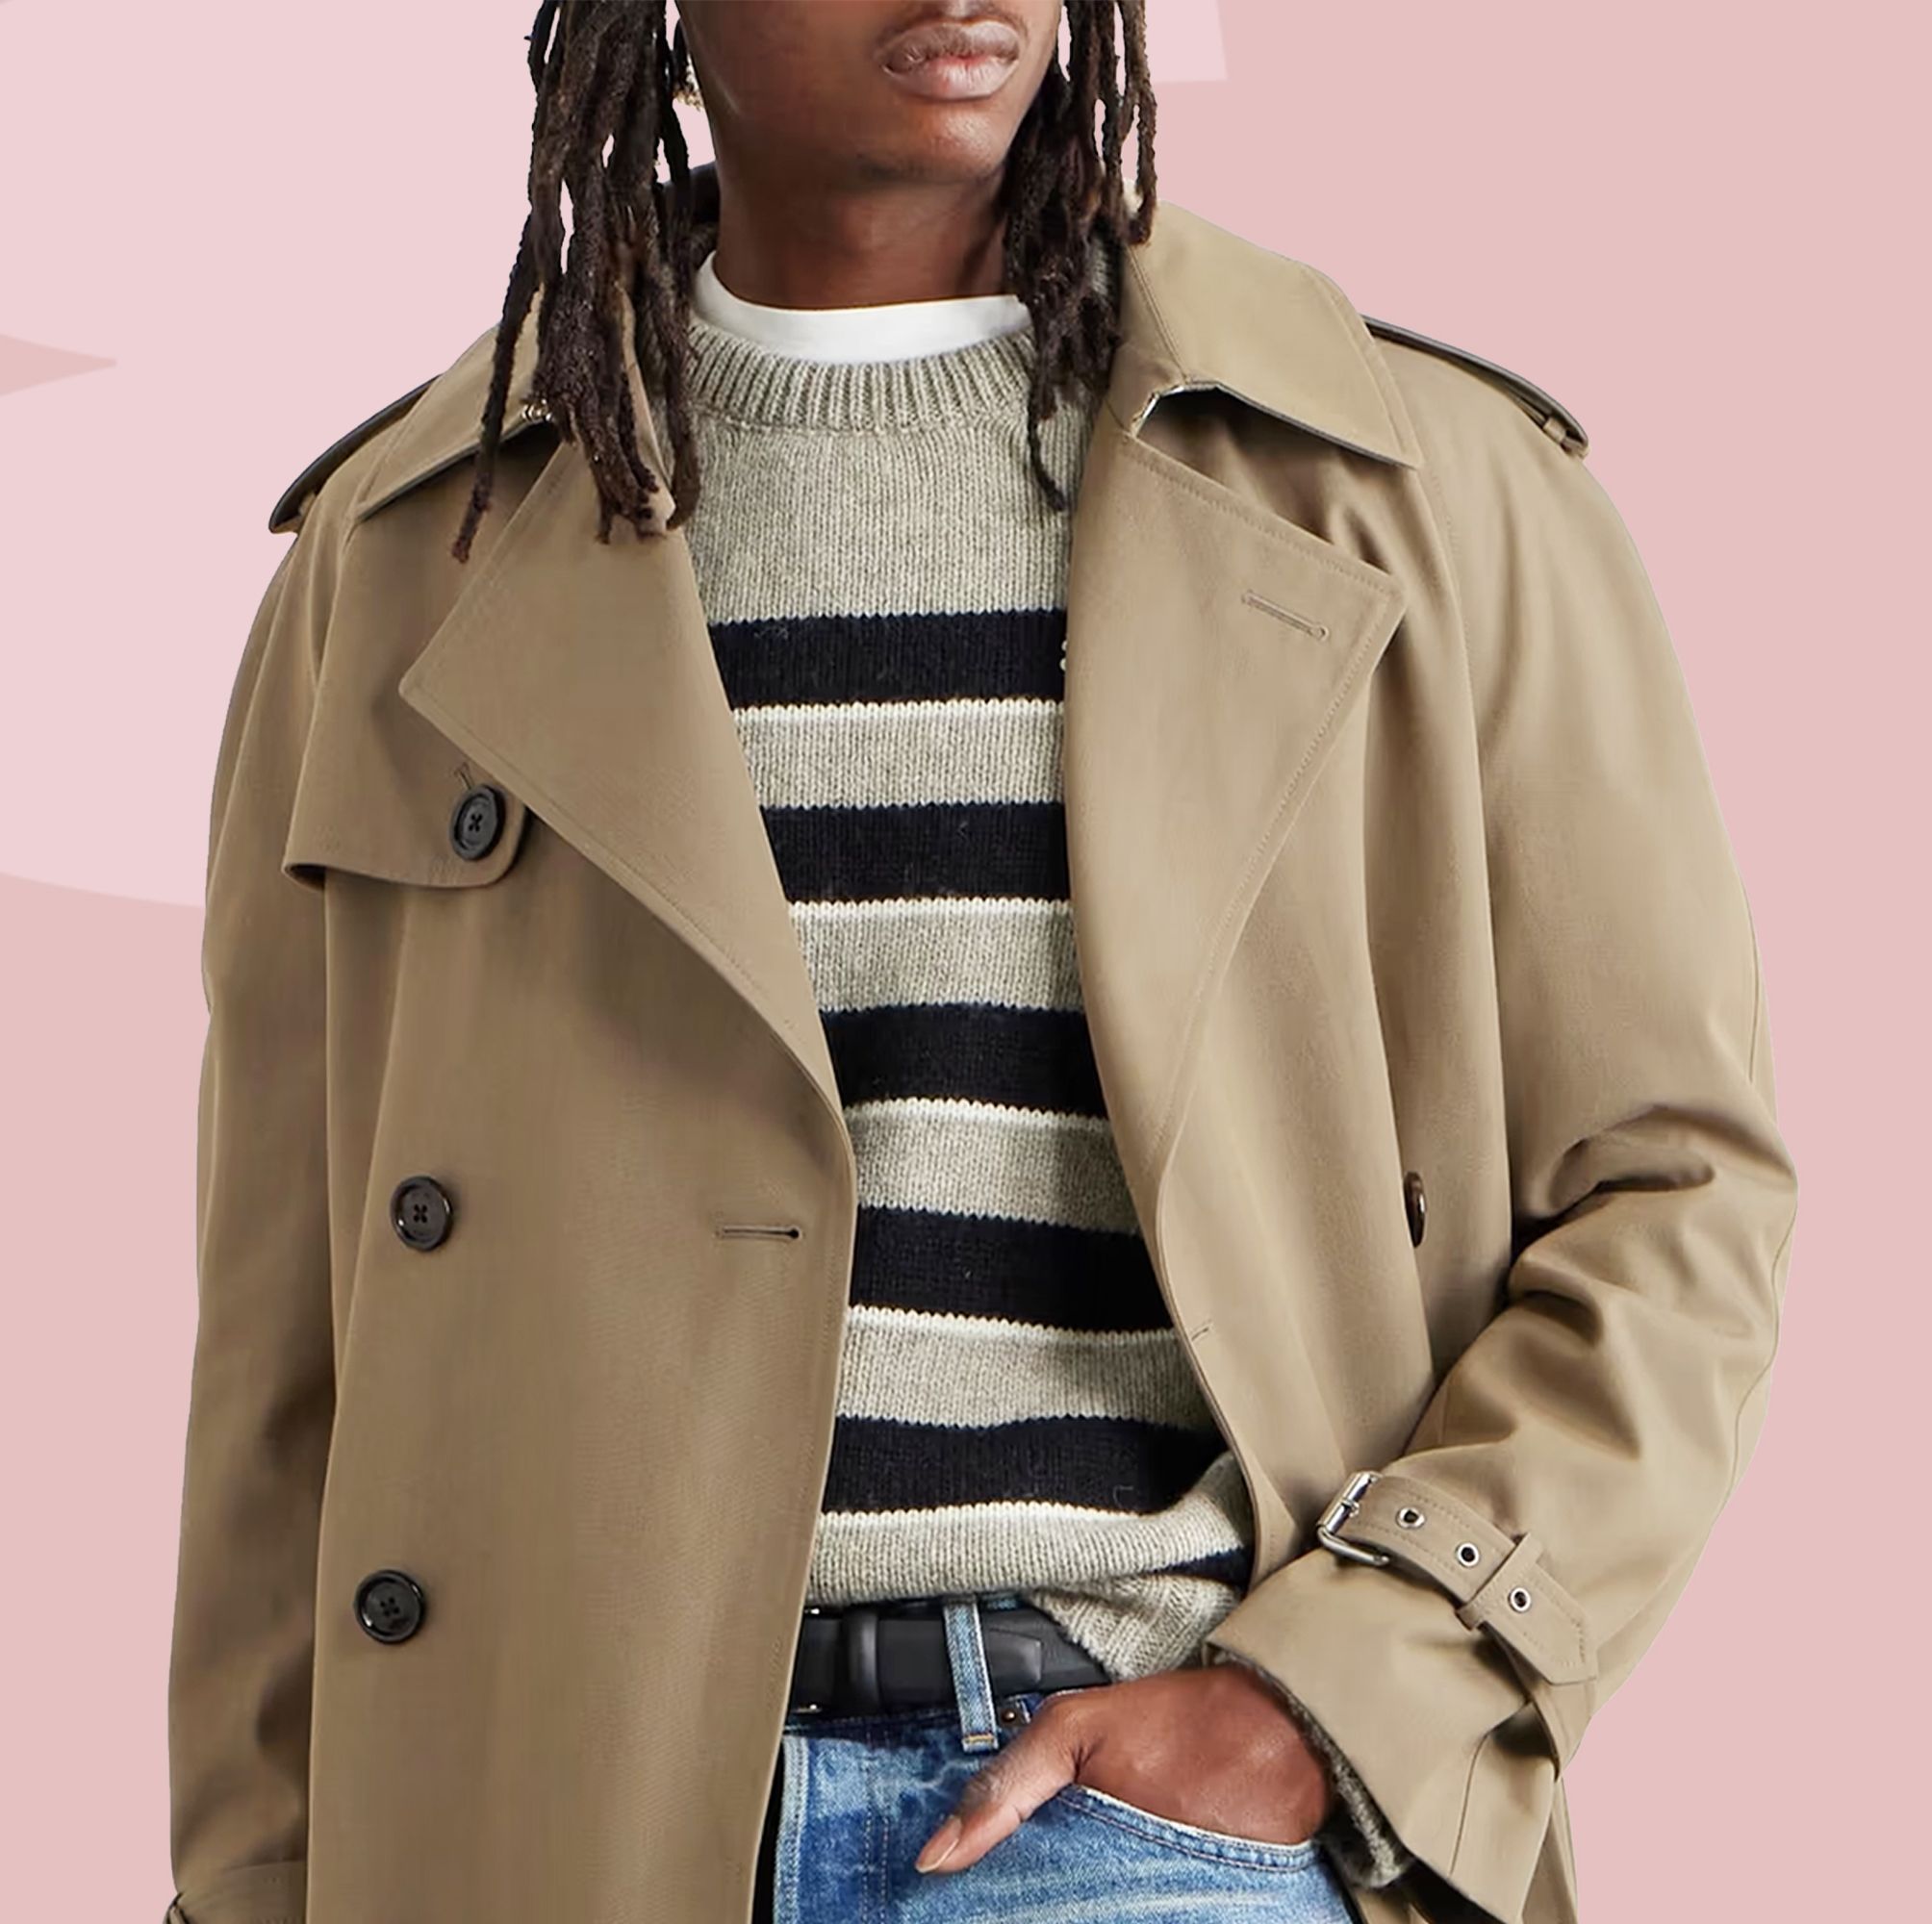 These Trench Coats Make Every Outfit Look Sharp